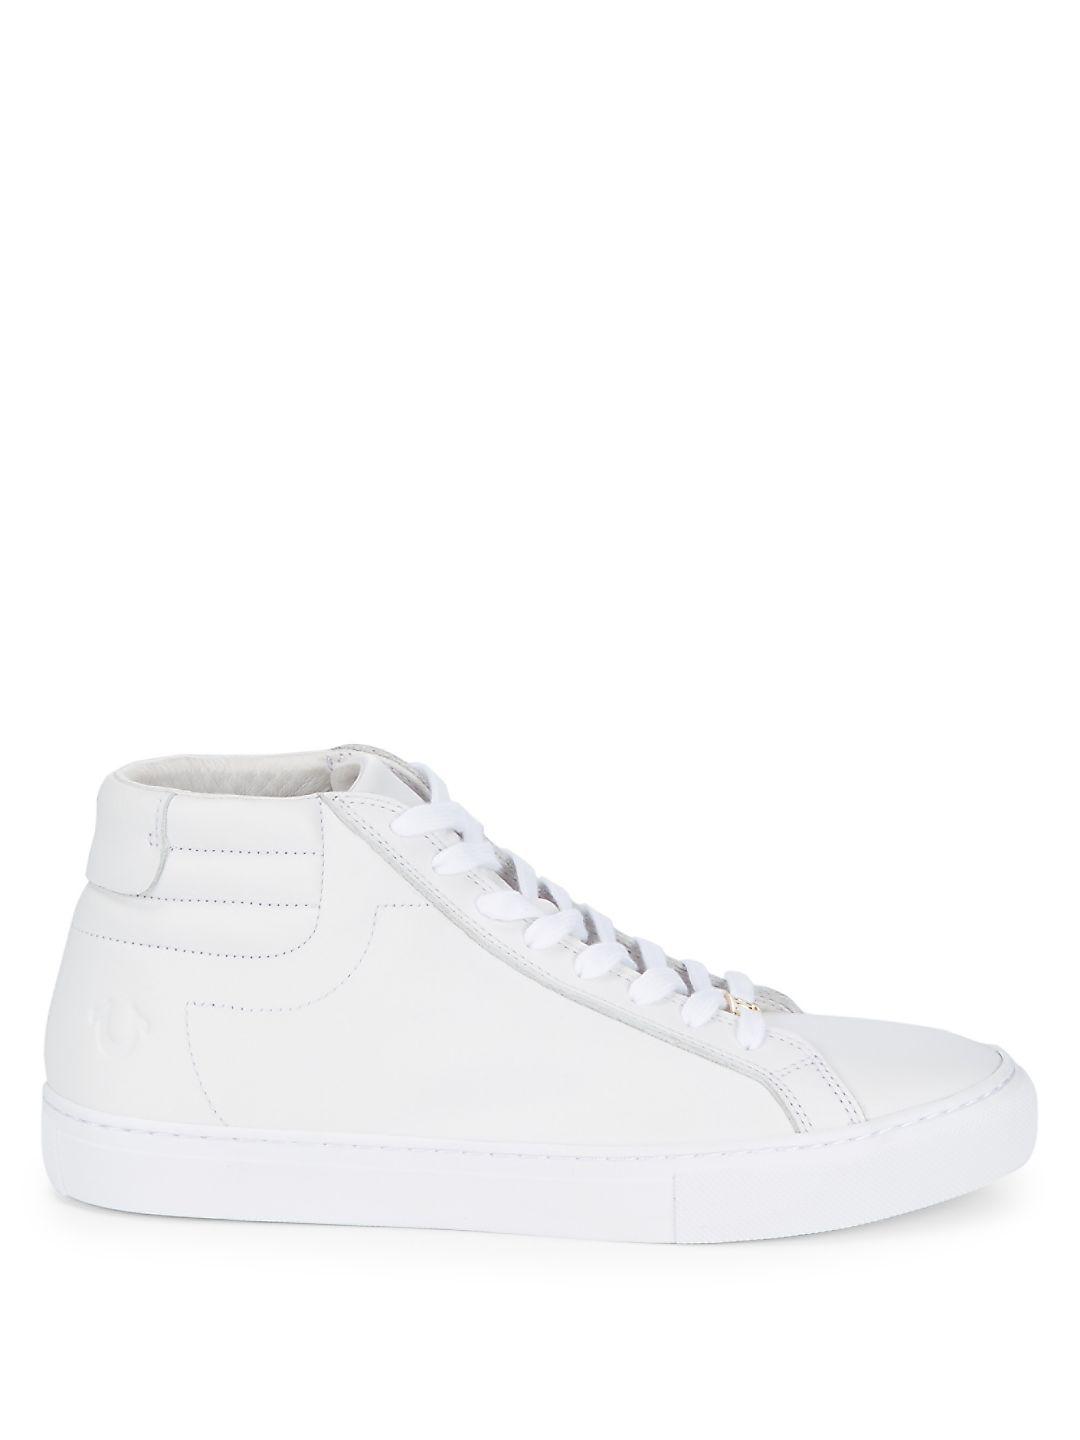 True Religion White Leather High Top Sneakers for Men | Lyst